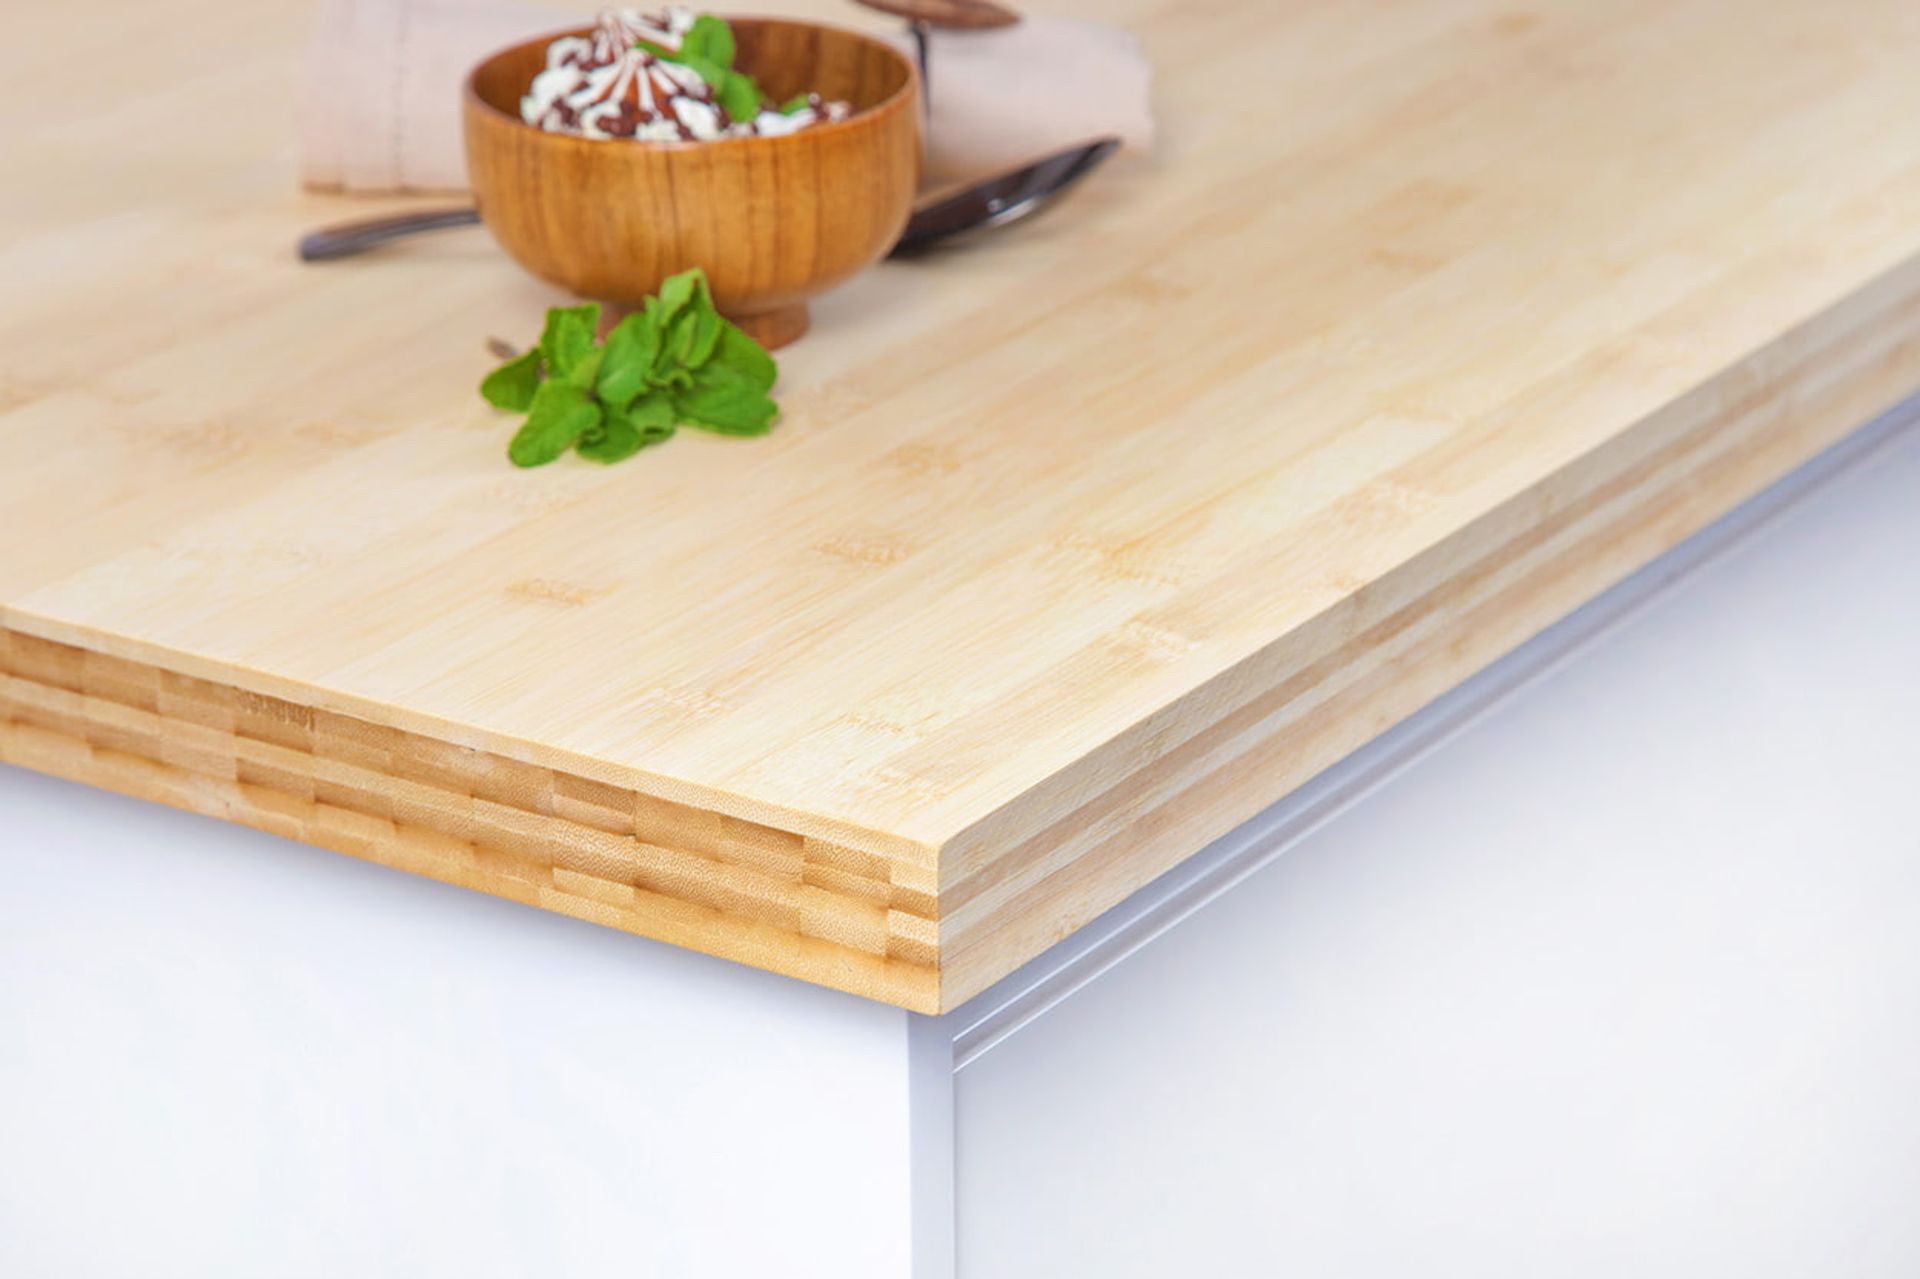 1 x Layered Solid Bamboo Wood Worktop - Size: 4000 x 650 x 40mm - Ideal For Kitchens, Countertops,